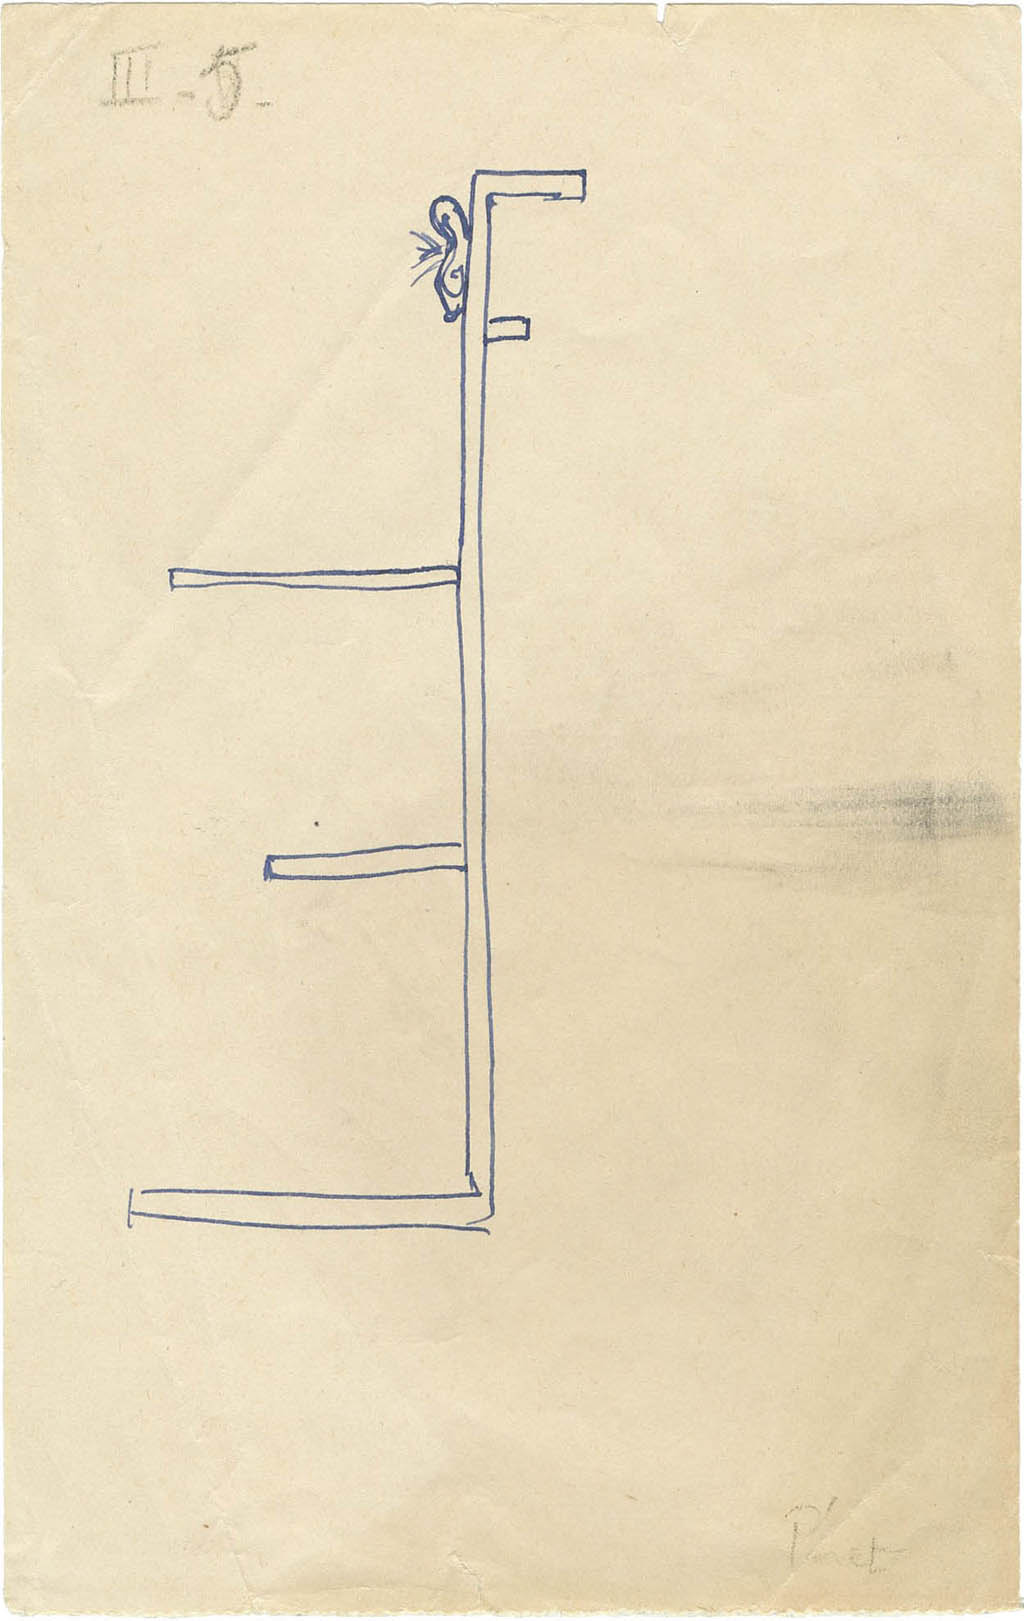 Jeu de Dessin Communique (Game of Communicated Drawing) - Benjamin Peret - Le Chaise RF (The Armchair RF) - c.1938 pencil and ink on six sheets of paper